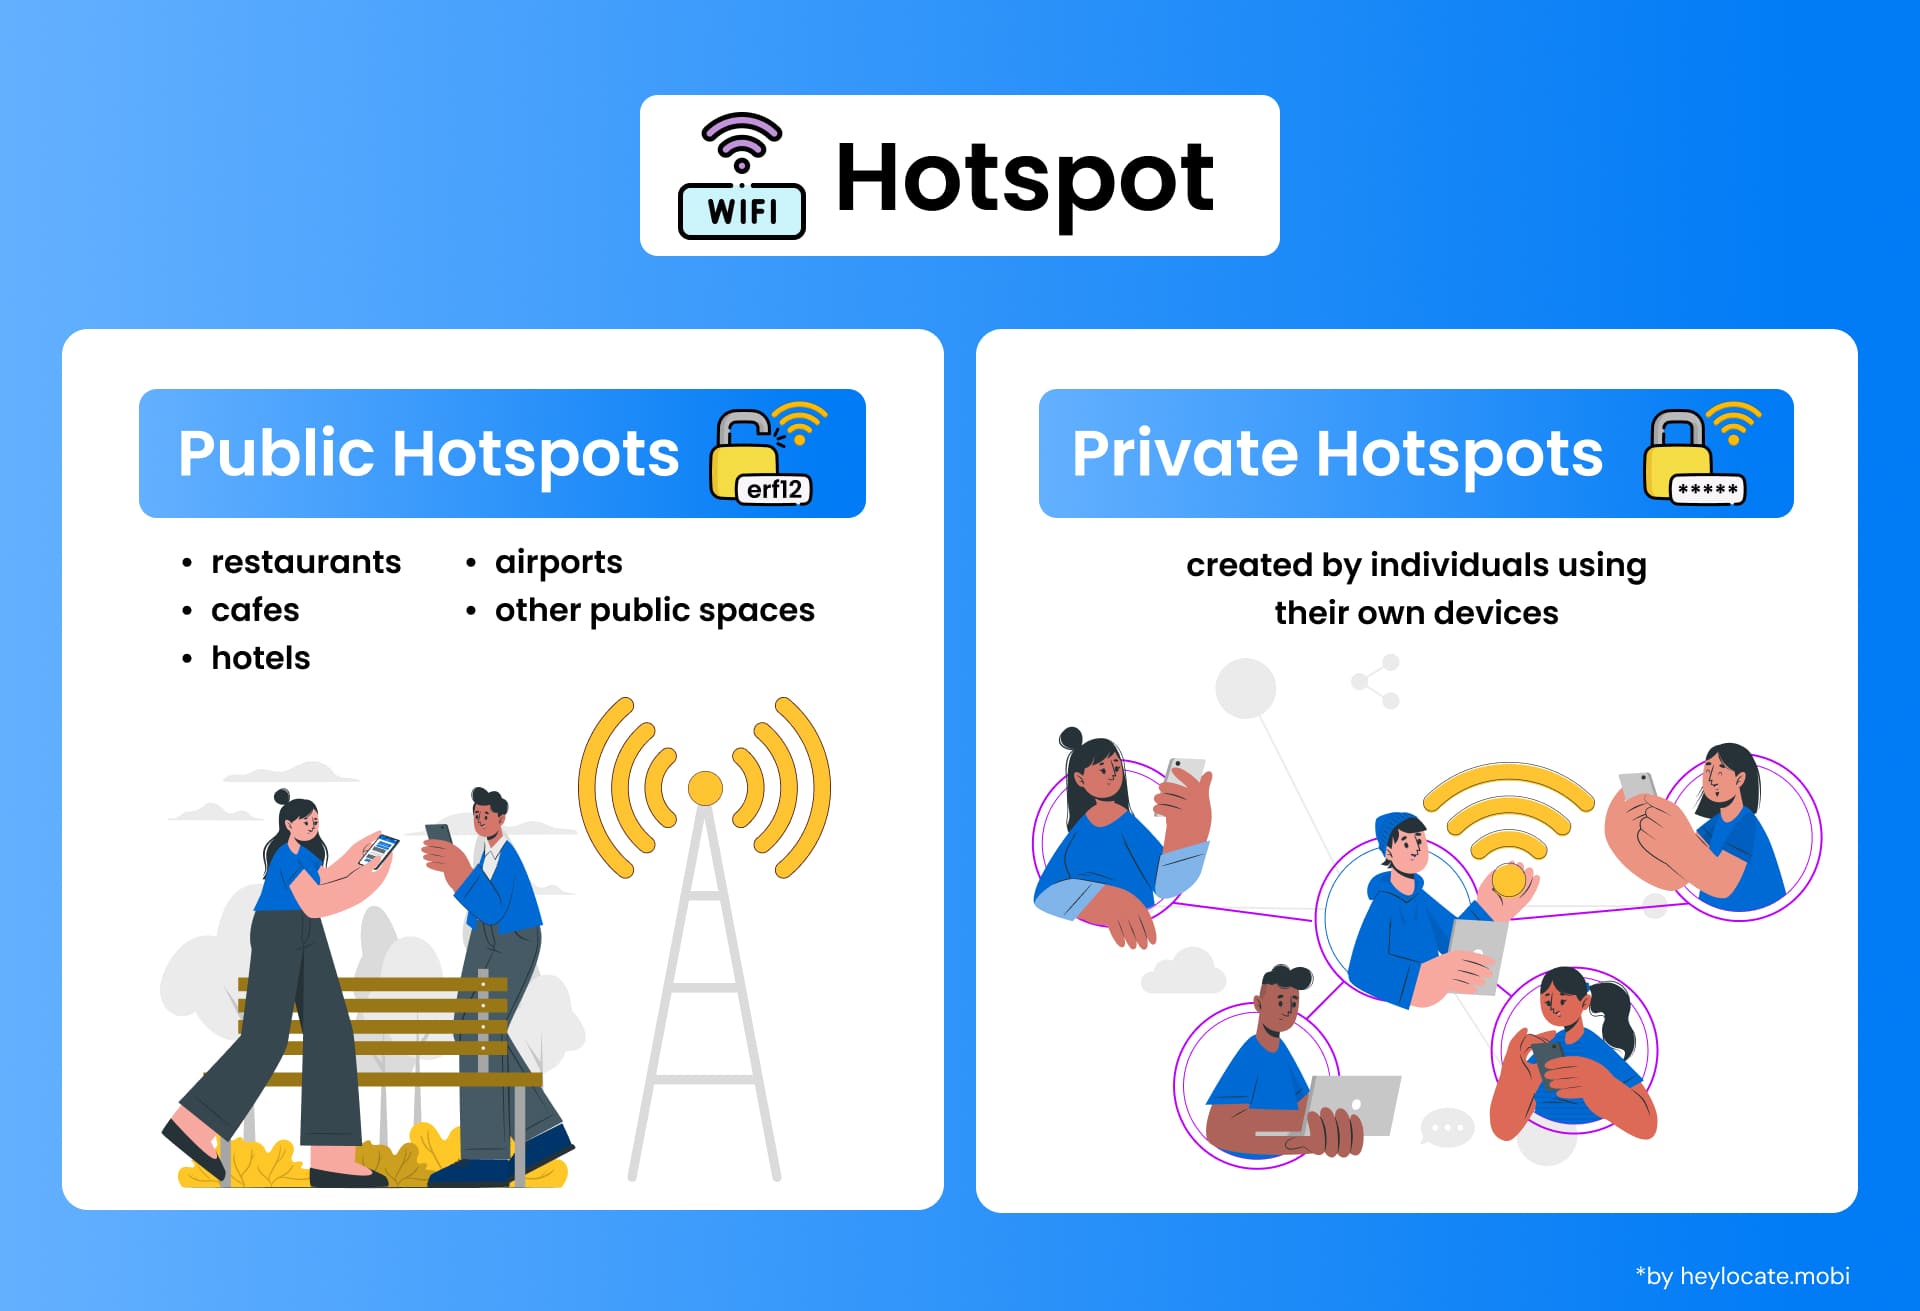 Illustration contrasting public hotspots in locations like cafes with private hotspots created by individuals on their devices.